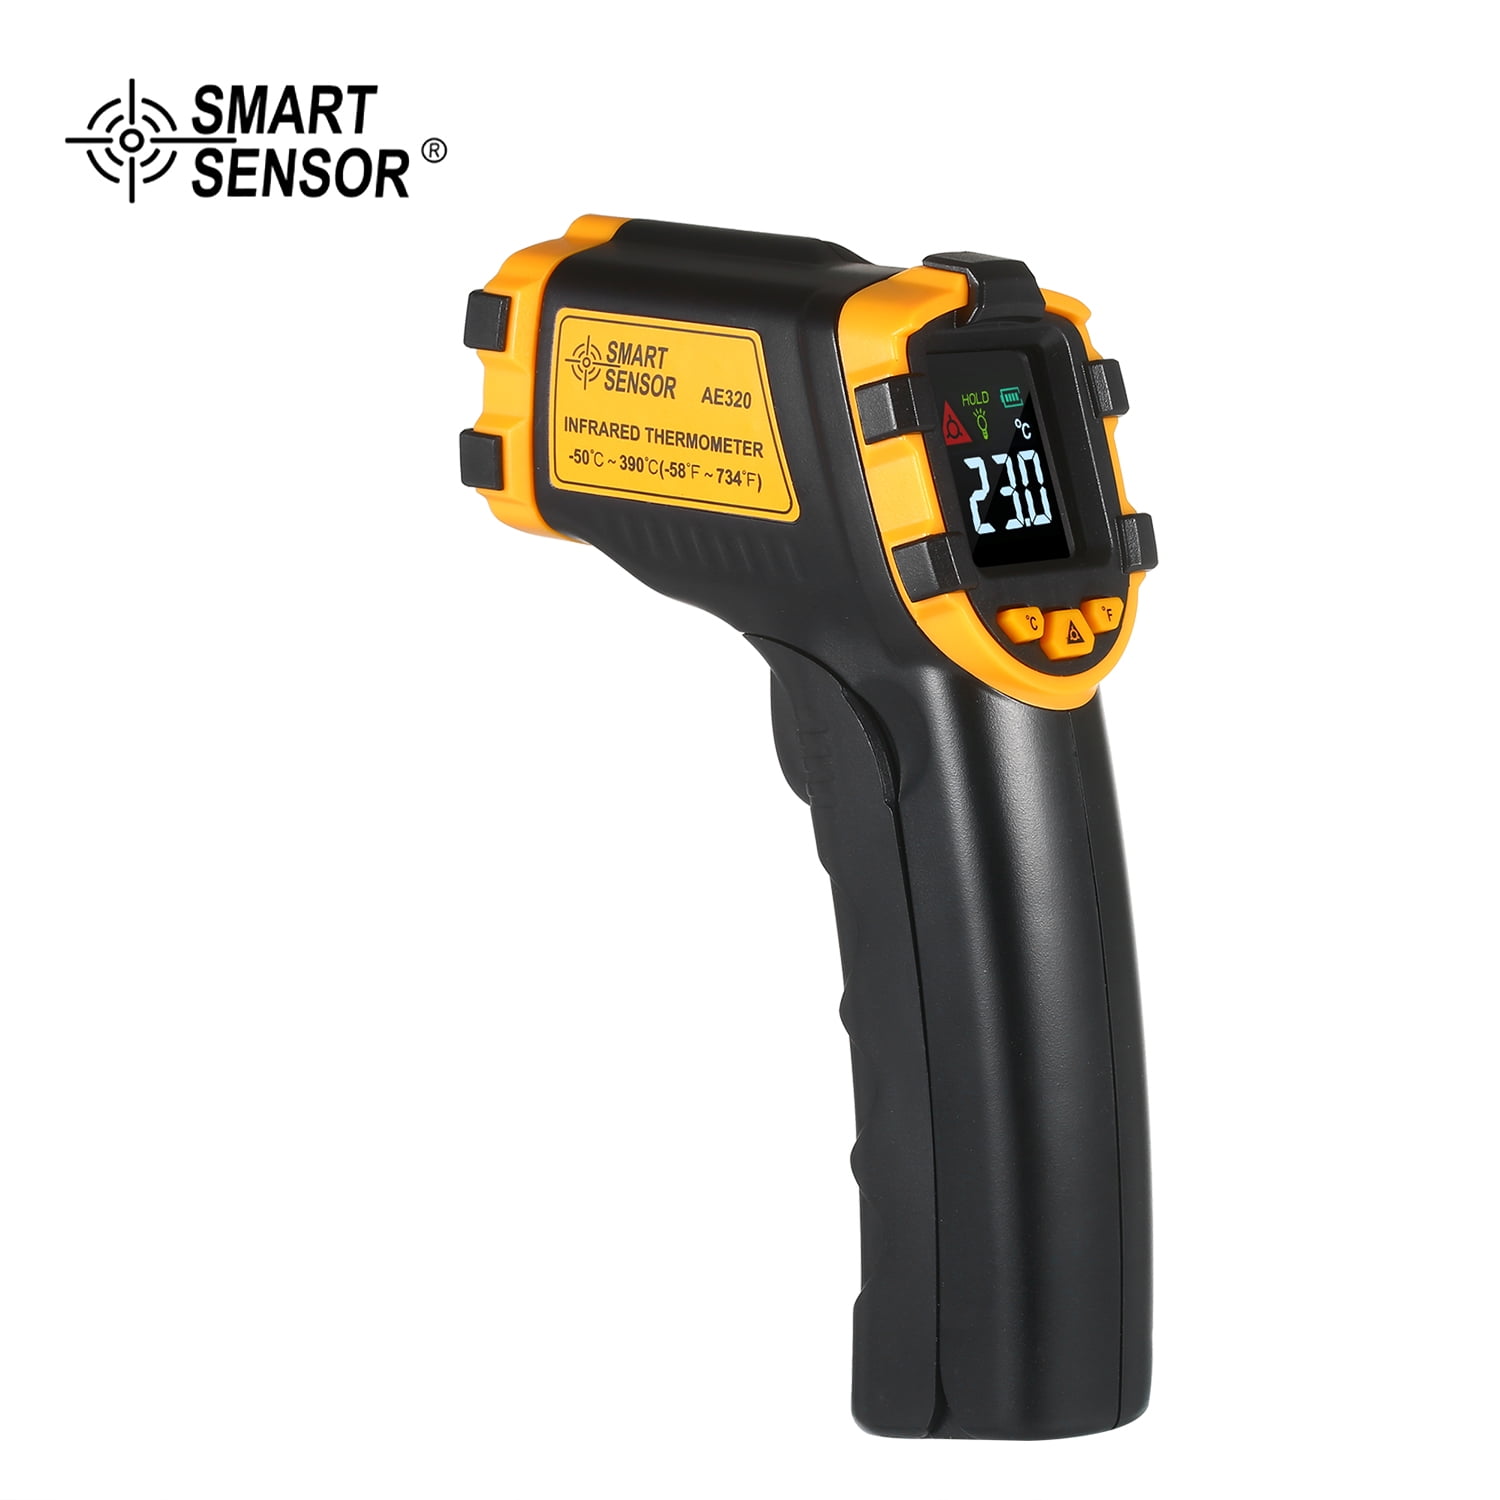 SMART SENSOR -50～390℃ 12:1 Non-contact IR Infrared Thermometer Temperature  Tester Pyrometer Industrial Infrared Thermometer Color LCD Display  Centigrade Fahrenheit (NOT for Humans) 